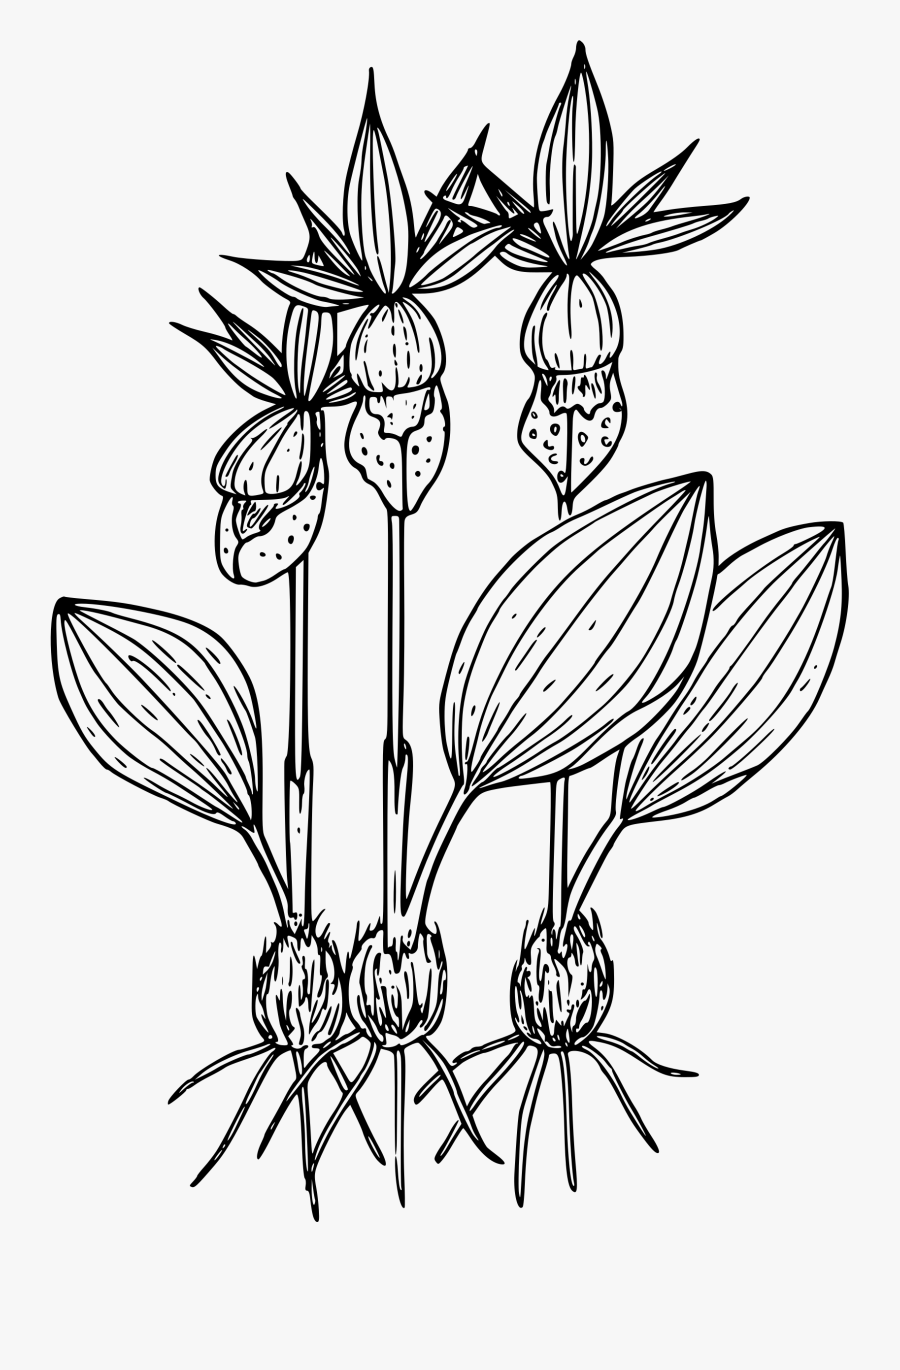 Orchid Clipart Black And White - Orchid Small Plant Clipart Black And White, Transparent Clipart